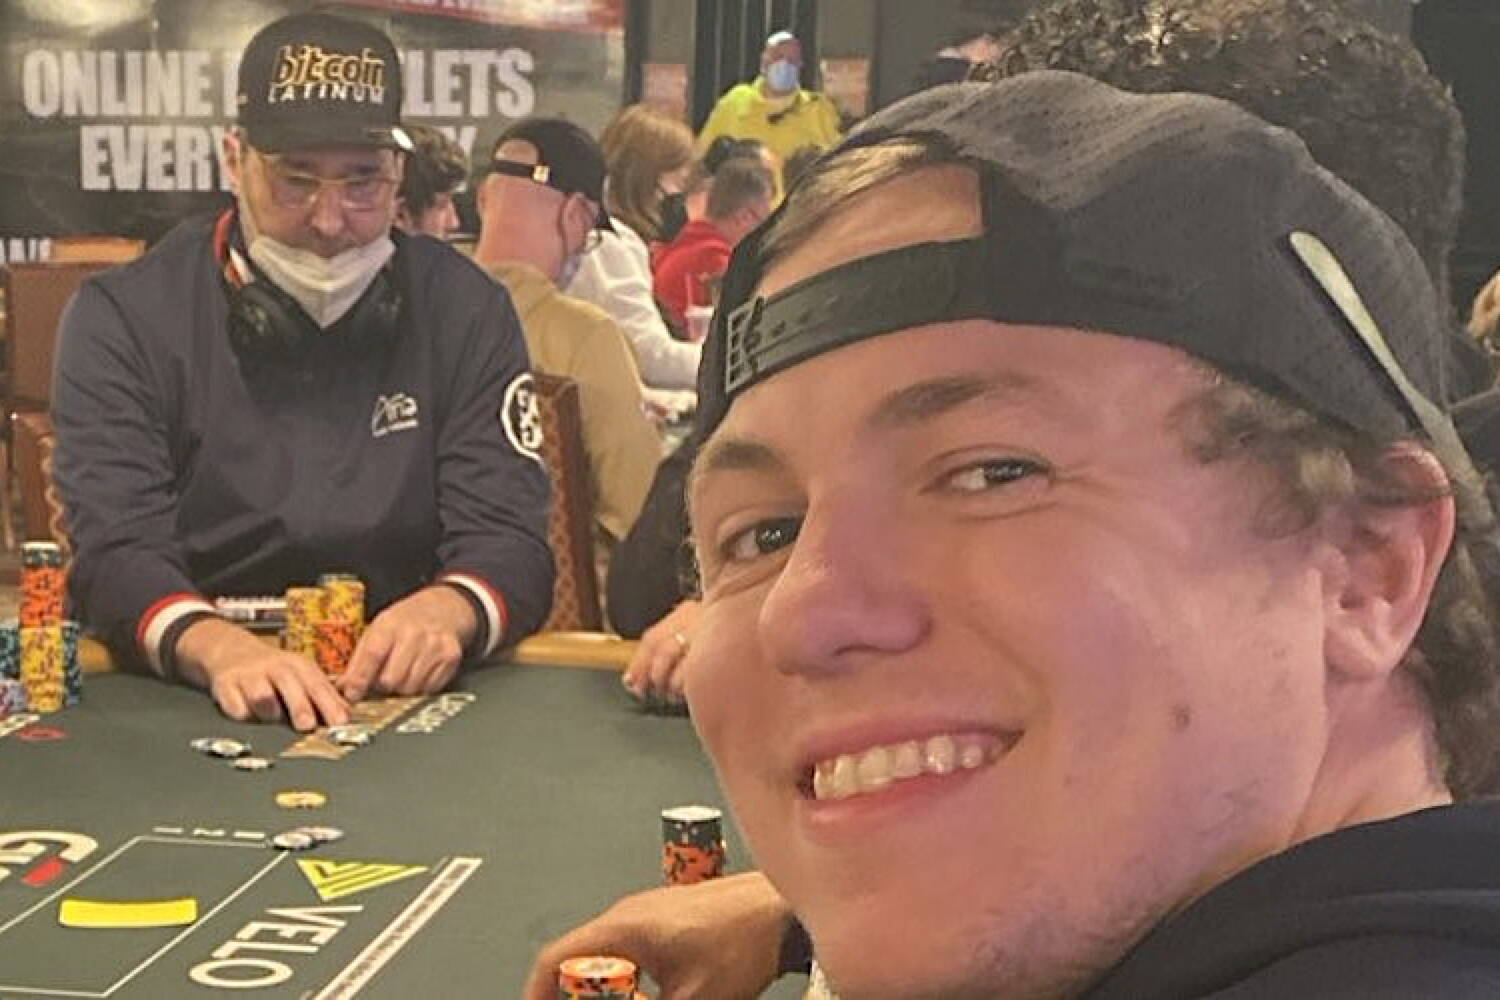 Juneau’s Jacob Thibodeau (right) takes a selfie with WSOP legend Phil Hellmuth in the background. (Photo provided by Alaska Sports Report)